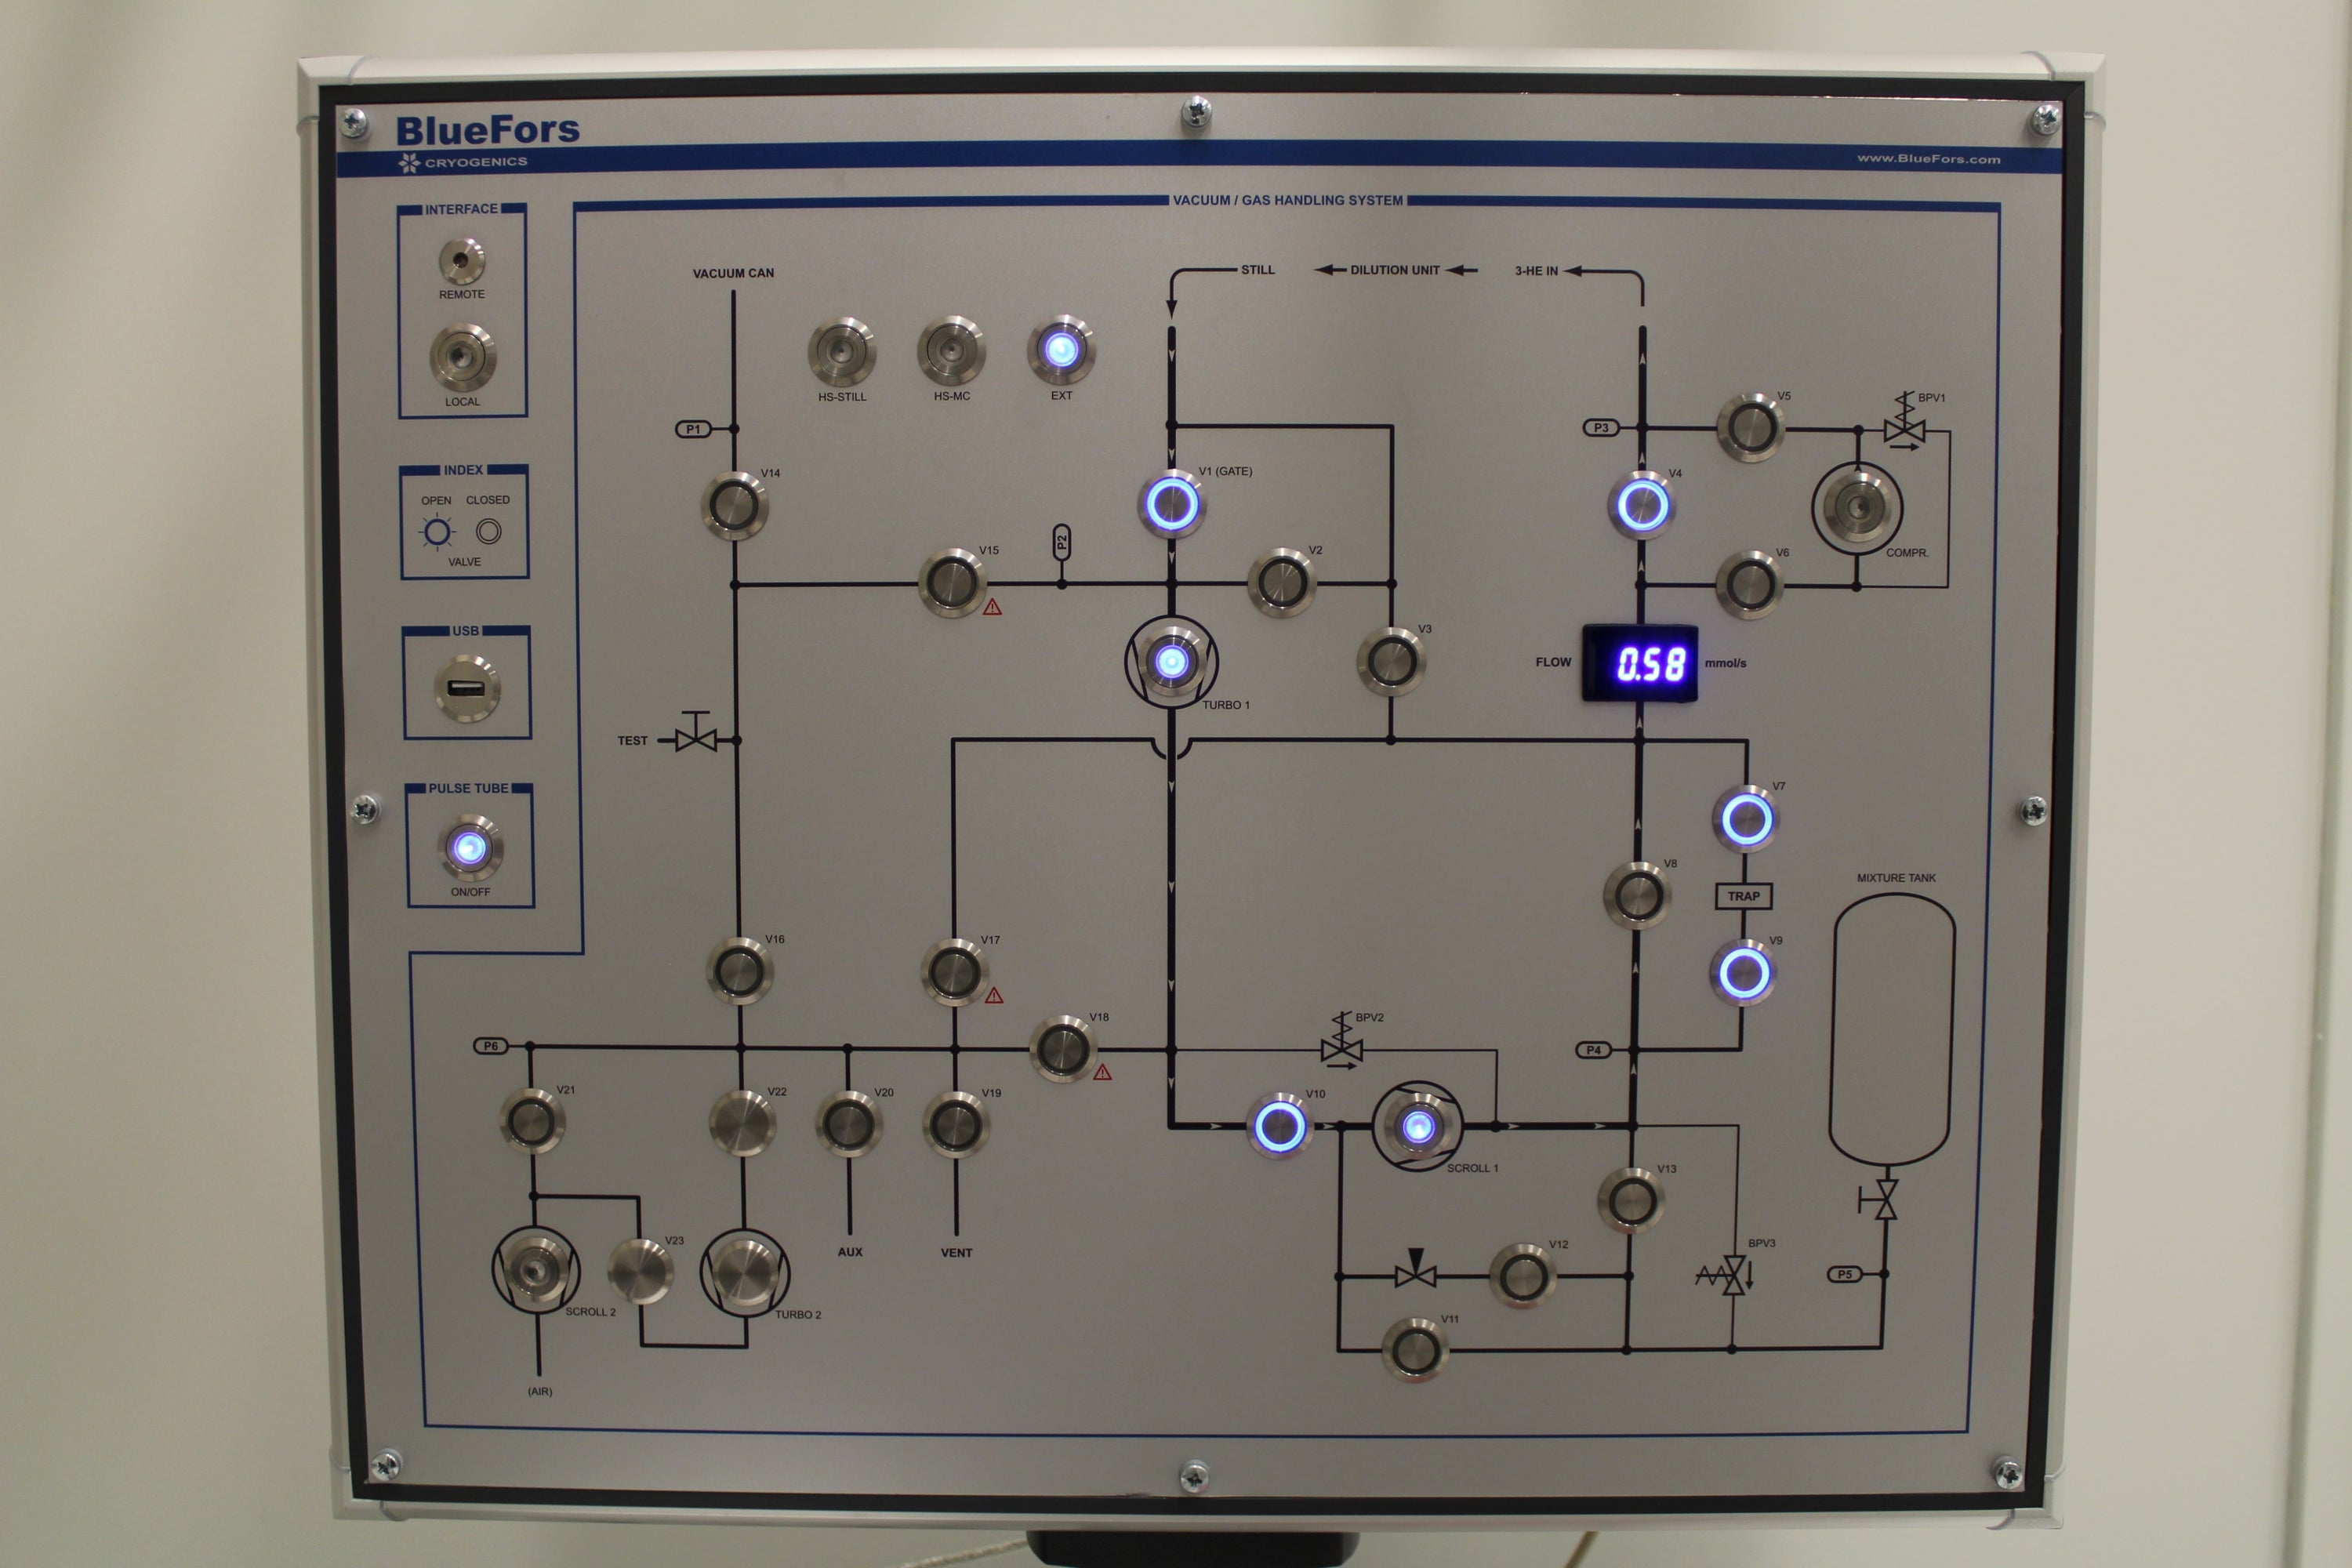 Vaccum/gas handling system in the Engineered Quantum Systems Laboratory